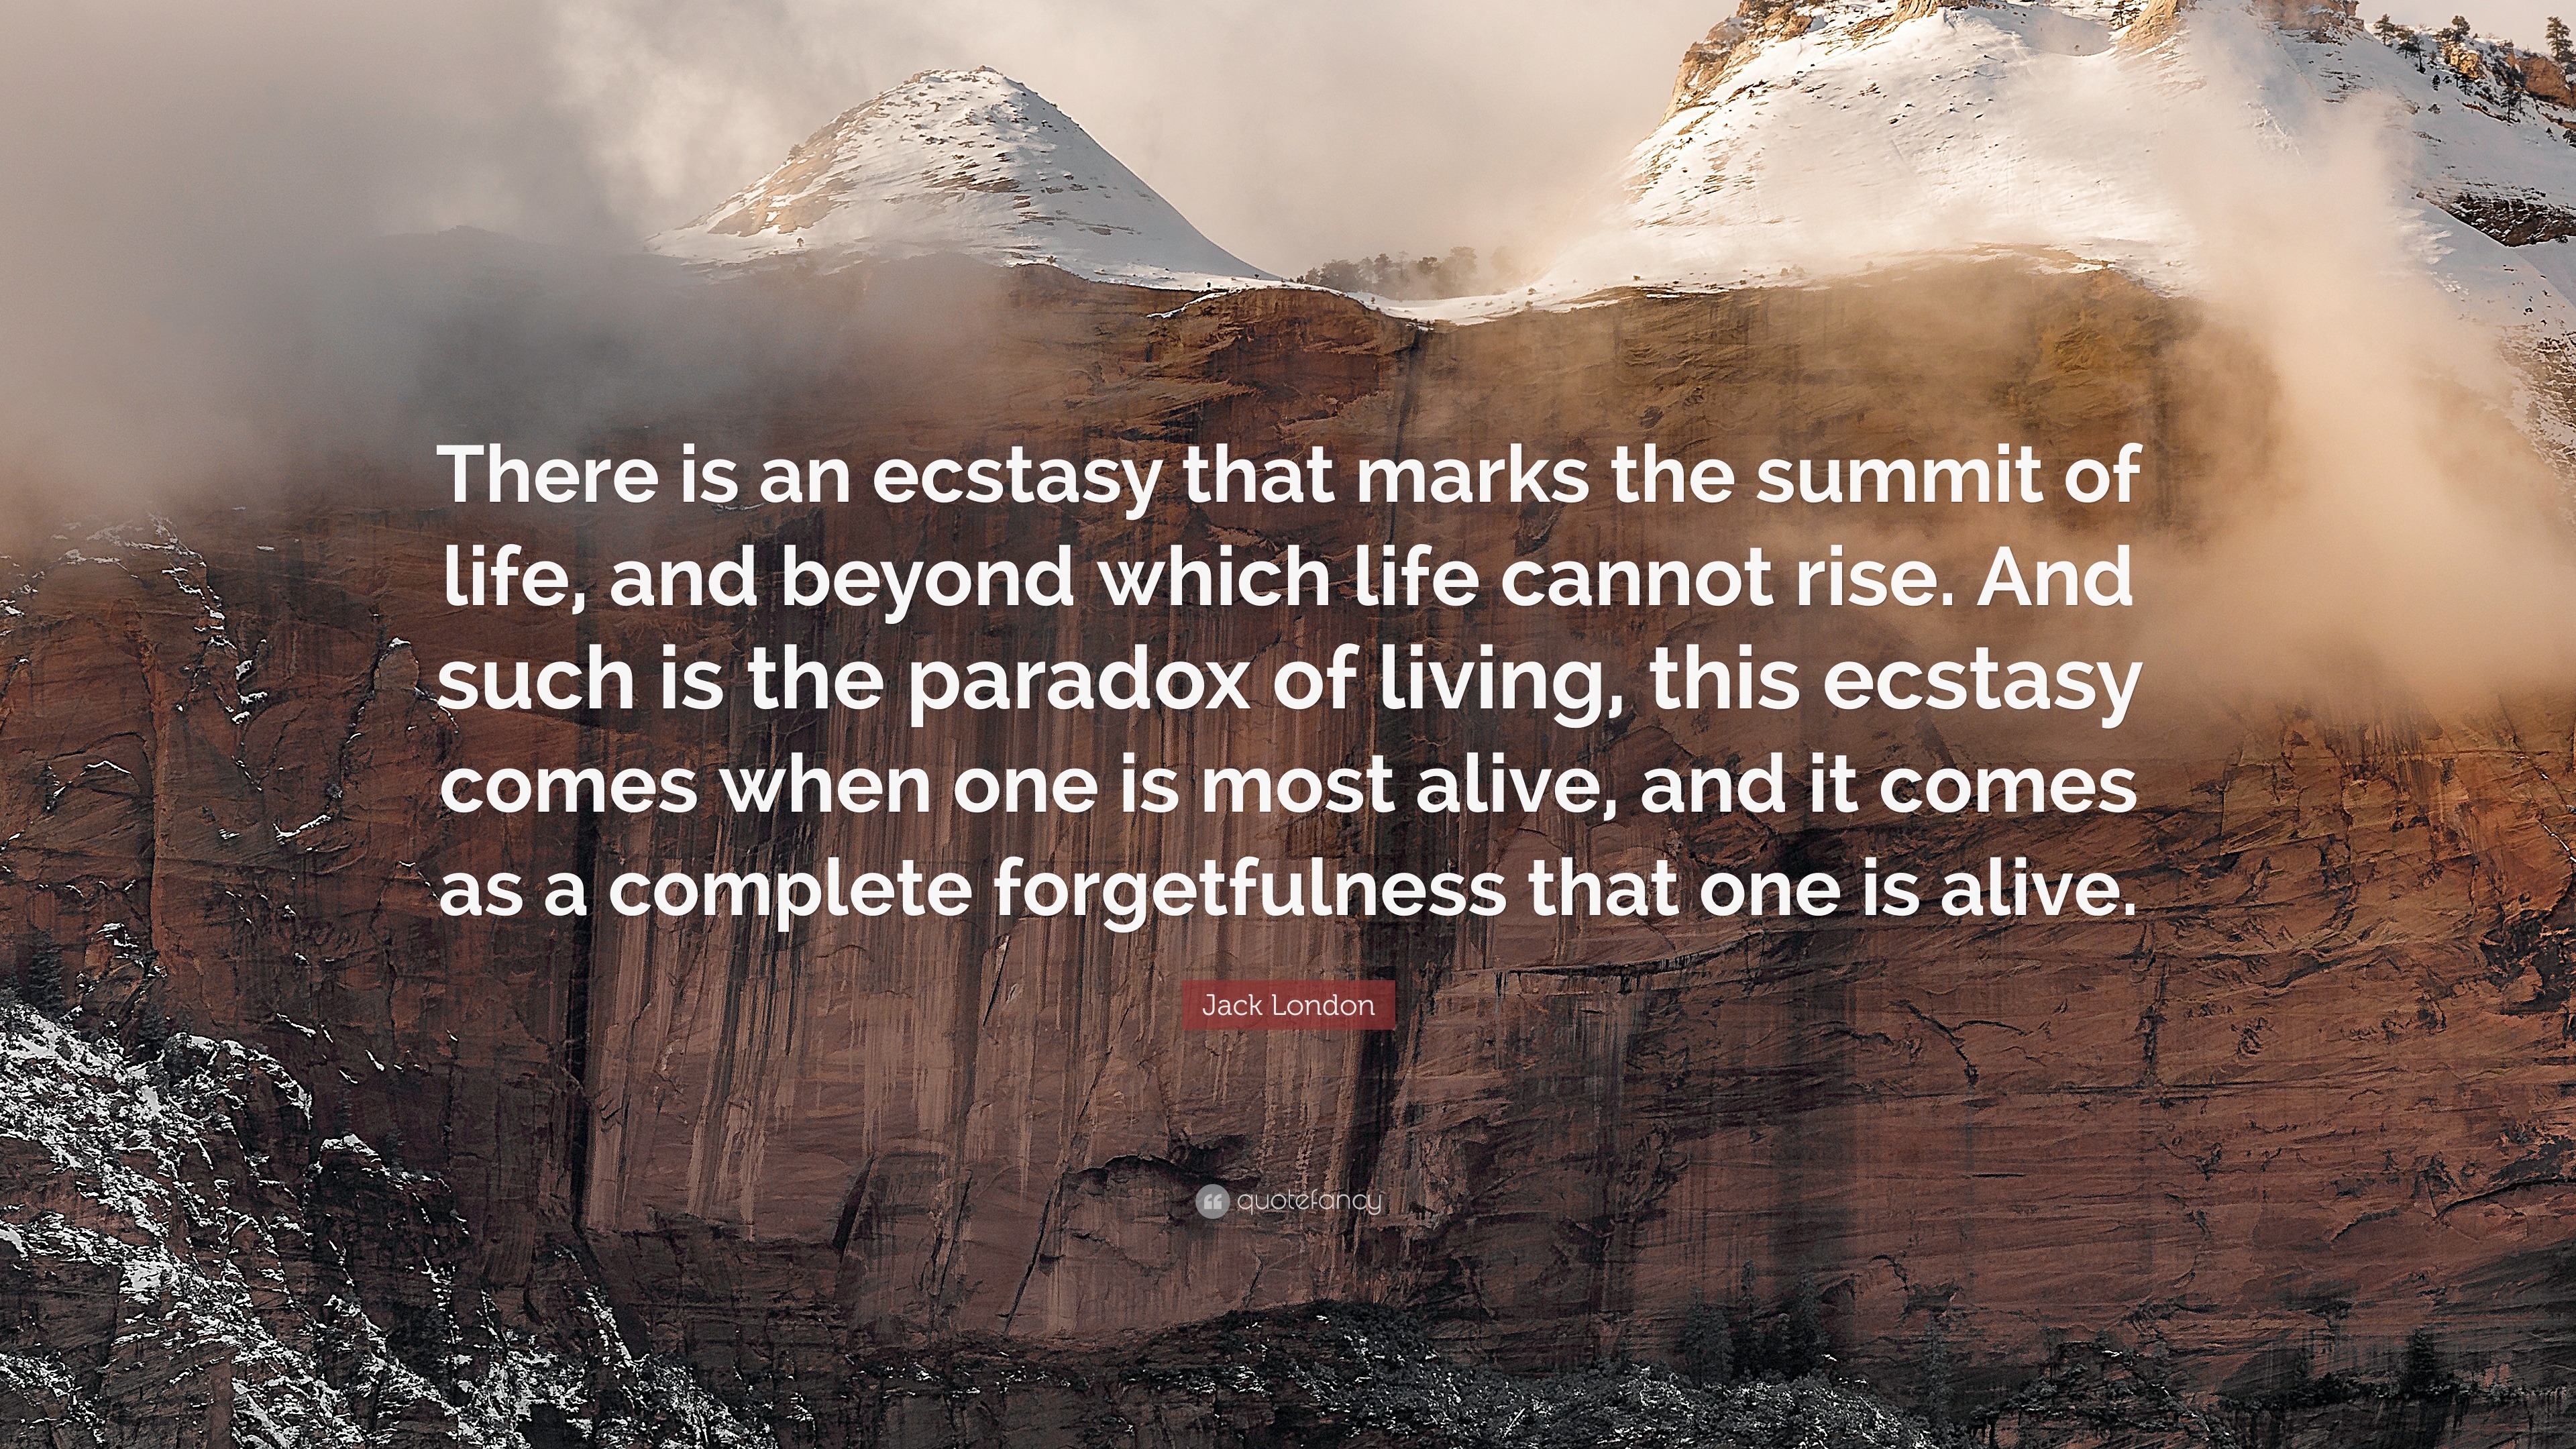 Jack London Quote “There is an ecstasy that marks the summit of life